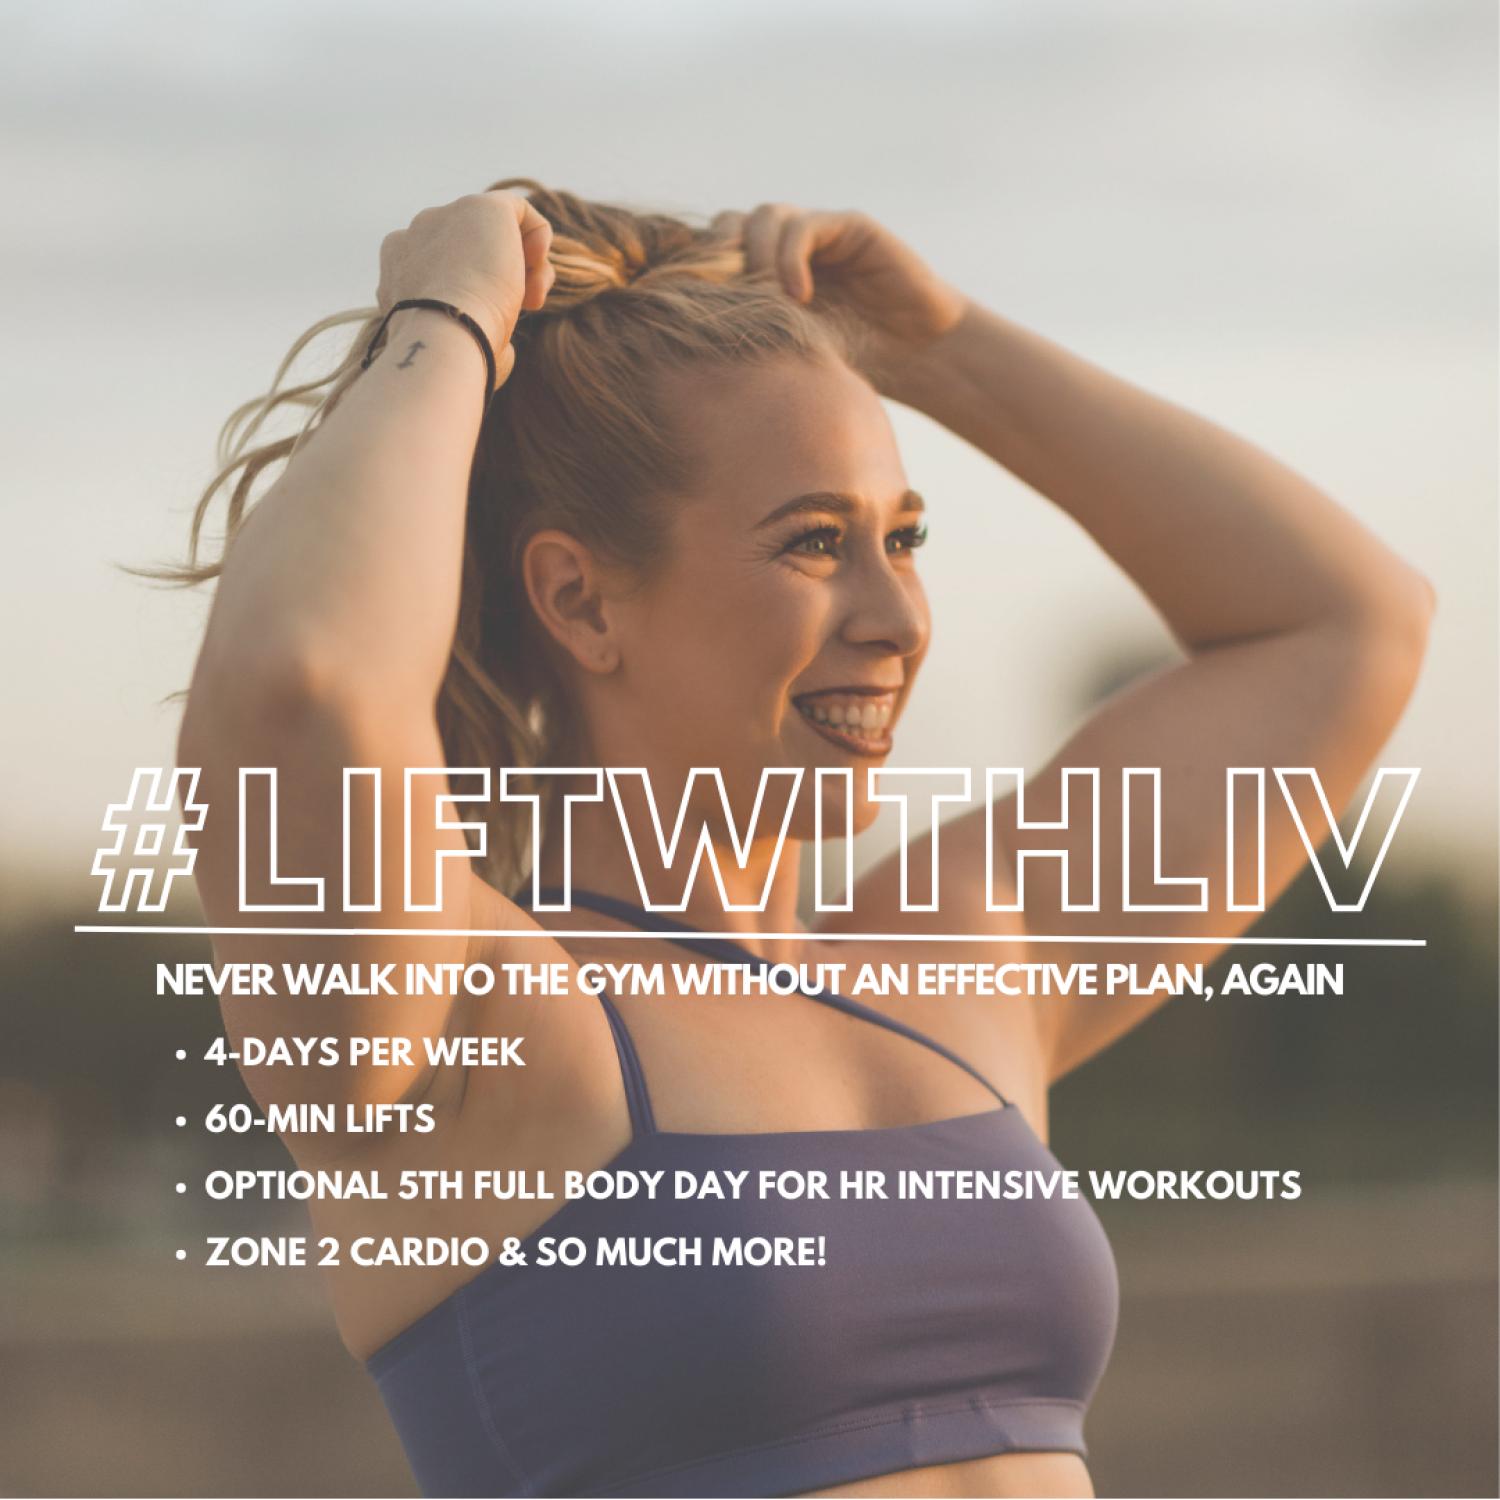 #LIFTWITHLIV